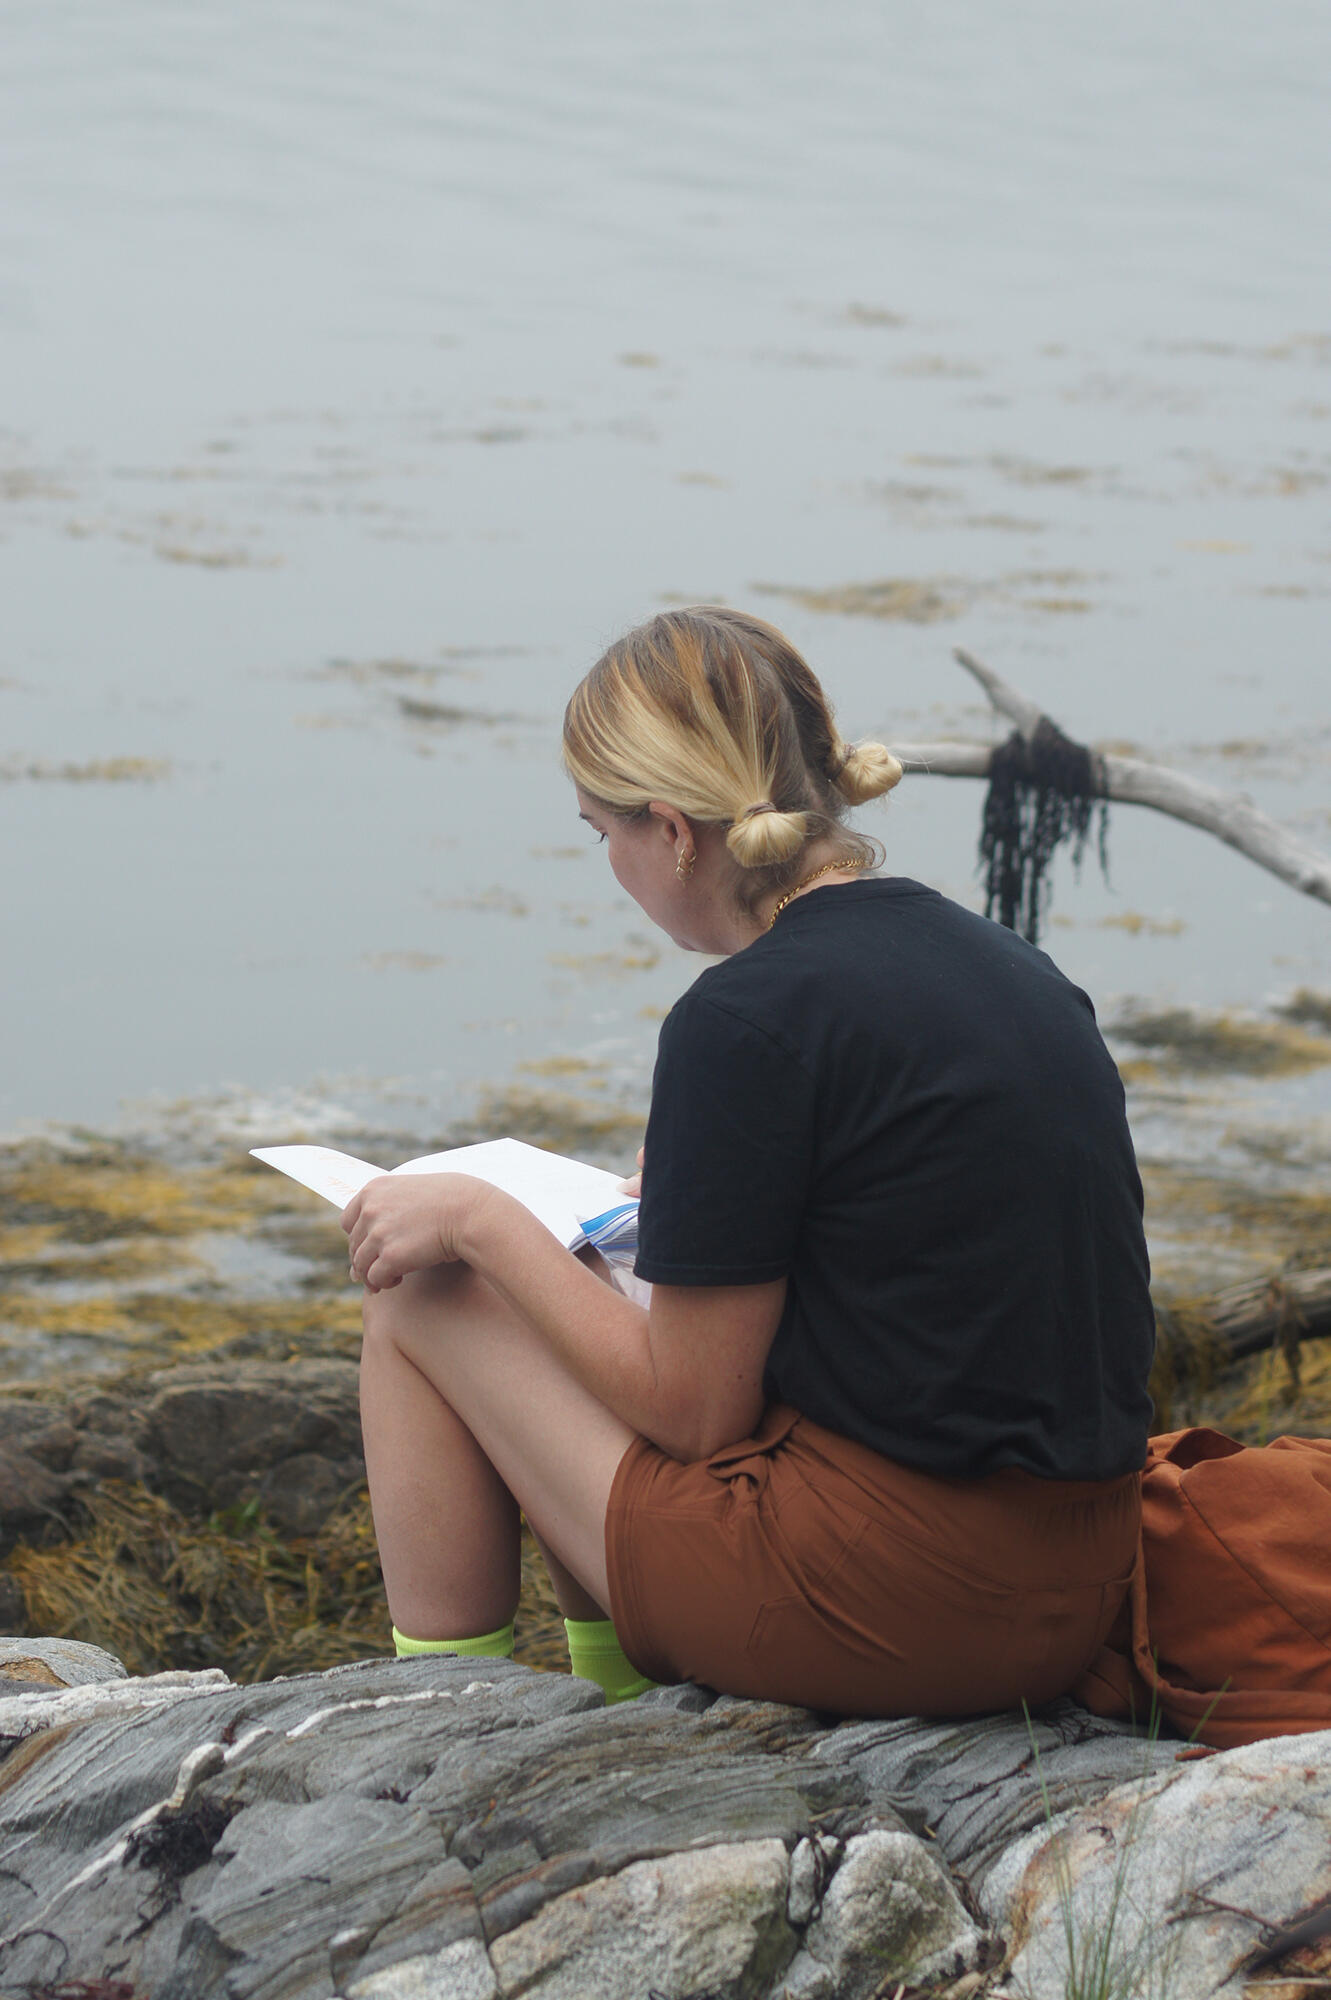 A camper, sitting on the shore, writing in a Nature Journal